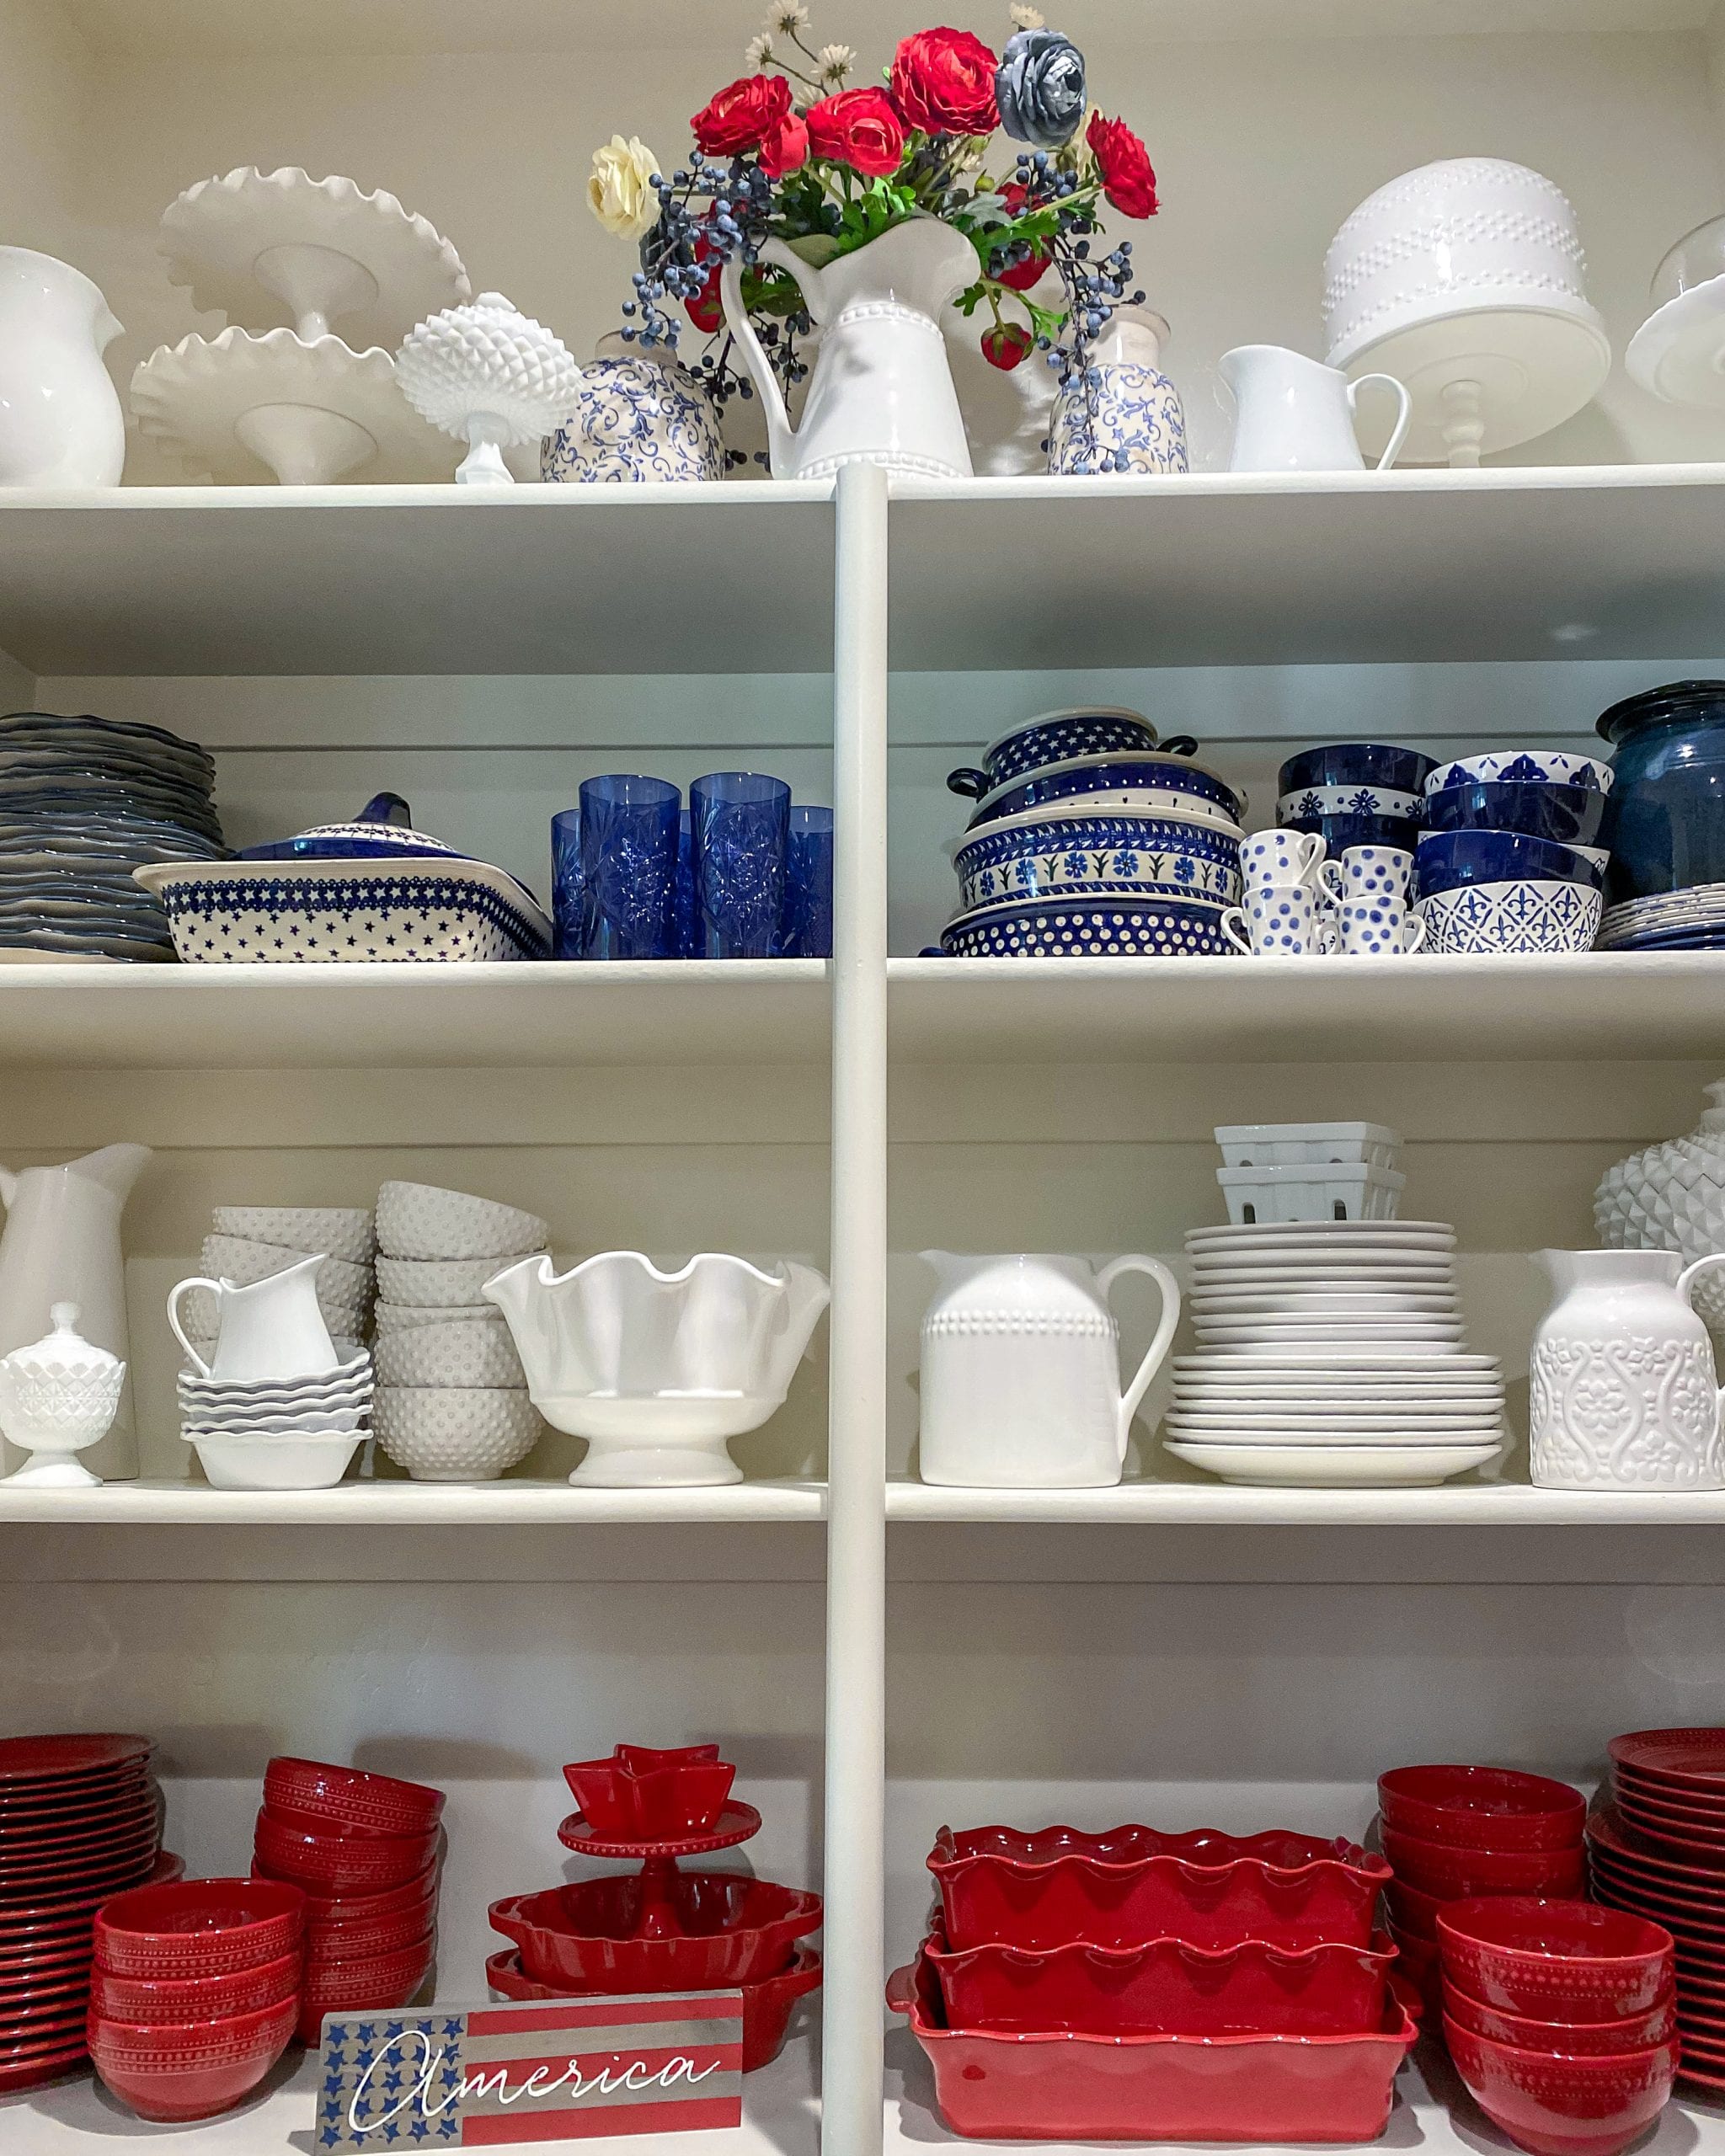 pantry dish collection red white and blue